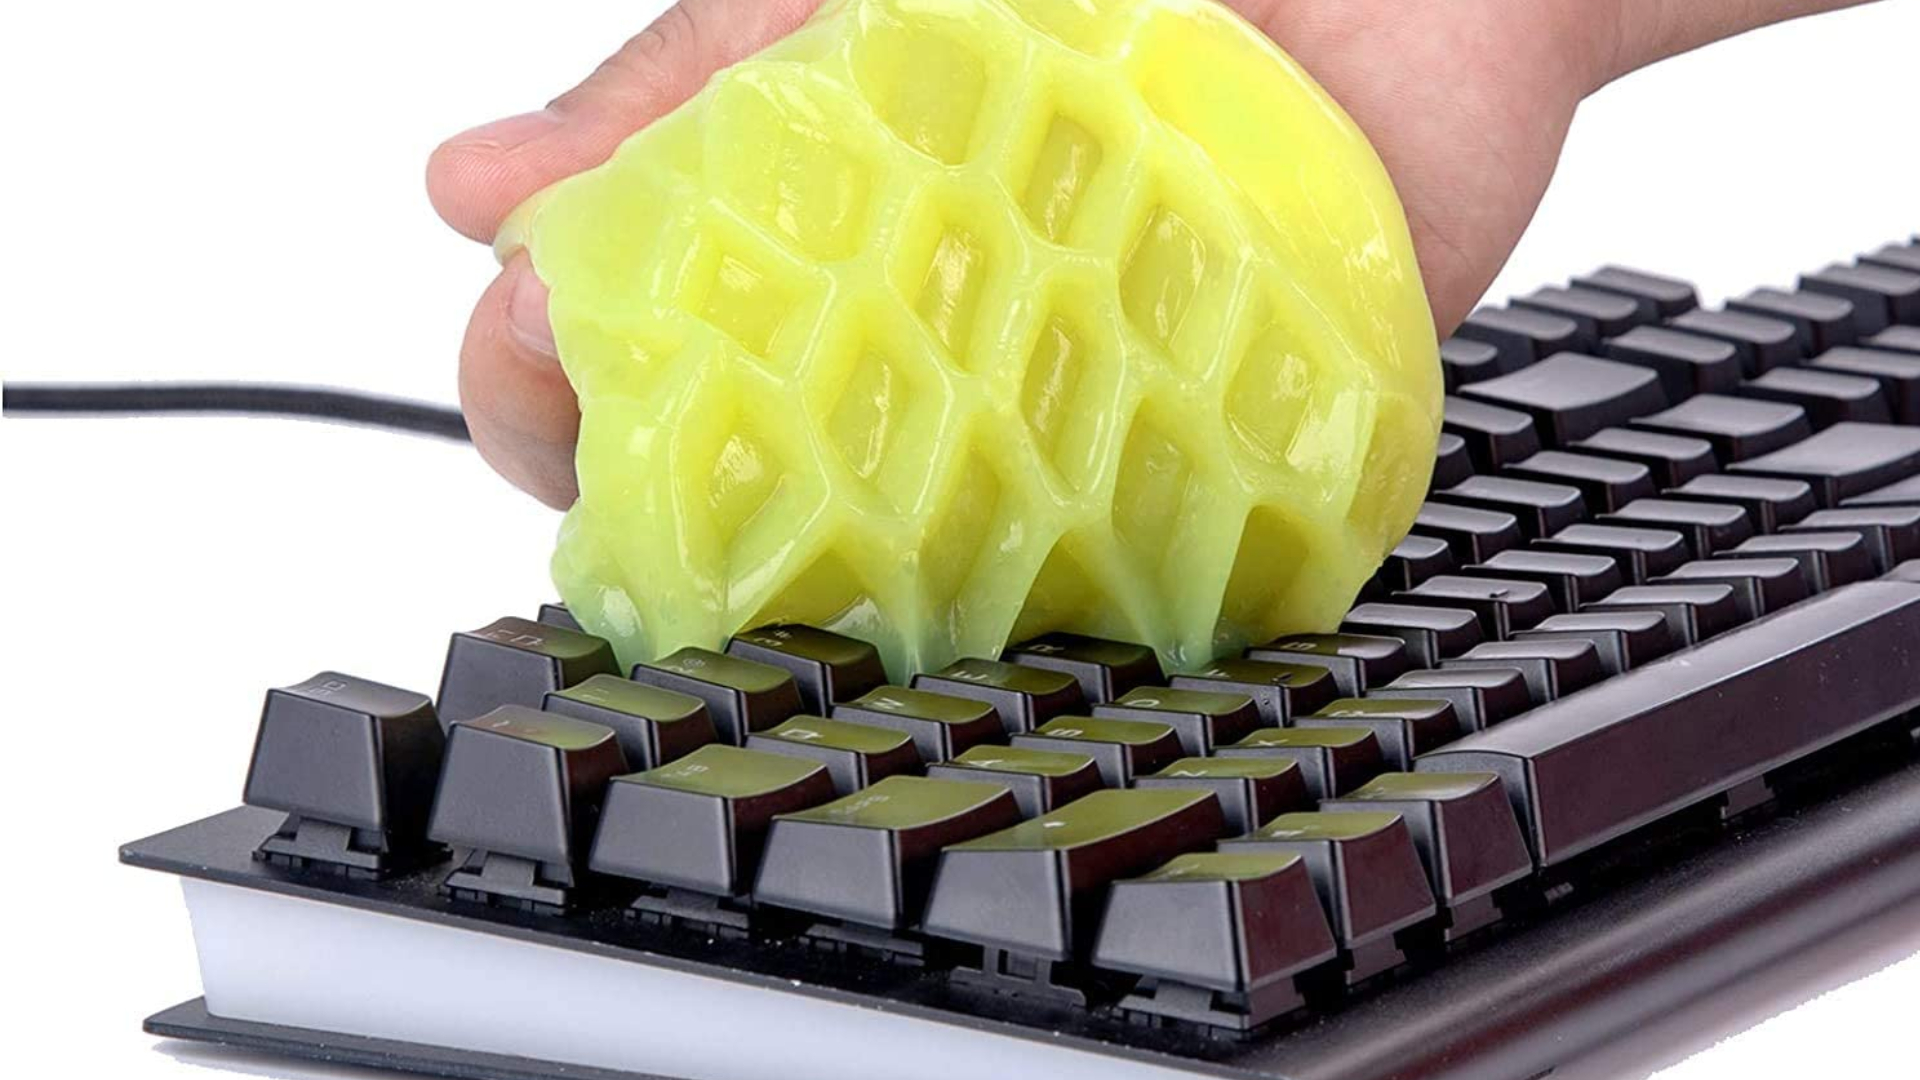 How to clean a keyboard: a general keyboard with someone using Putin gel